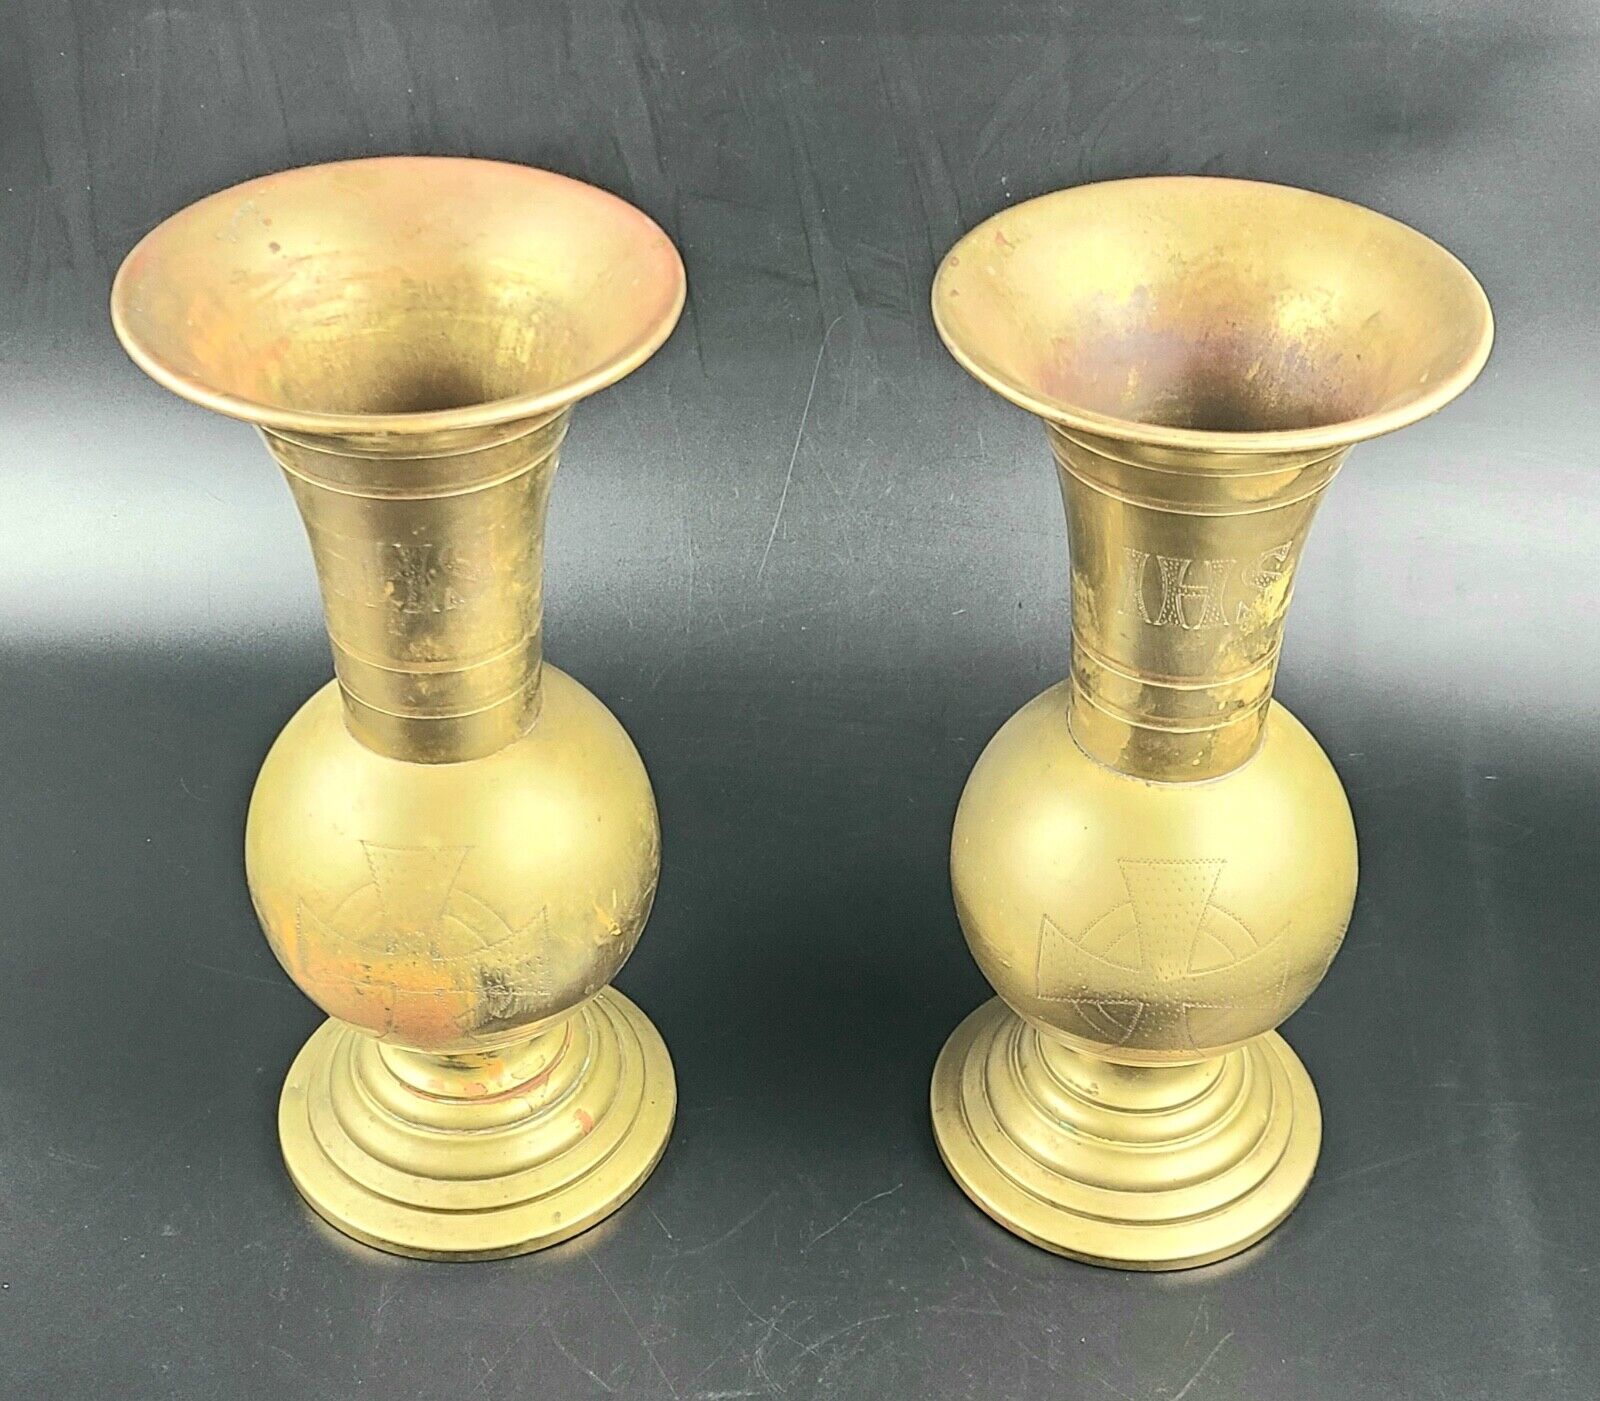 Antique  -Pair - Brass Vases with Etched IHS and Alter Cross Signs/Symbols